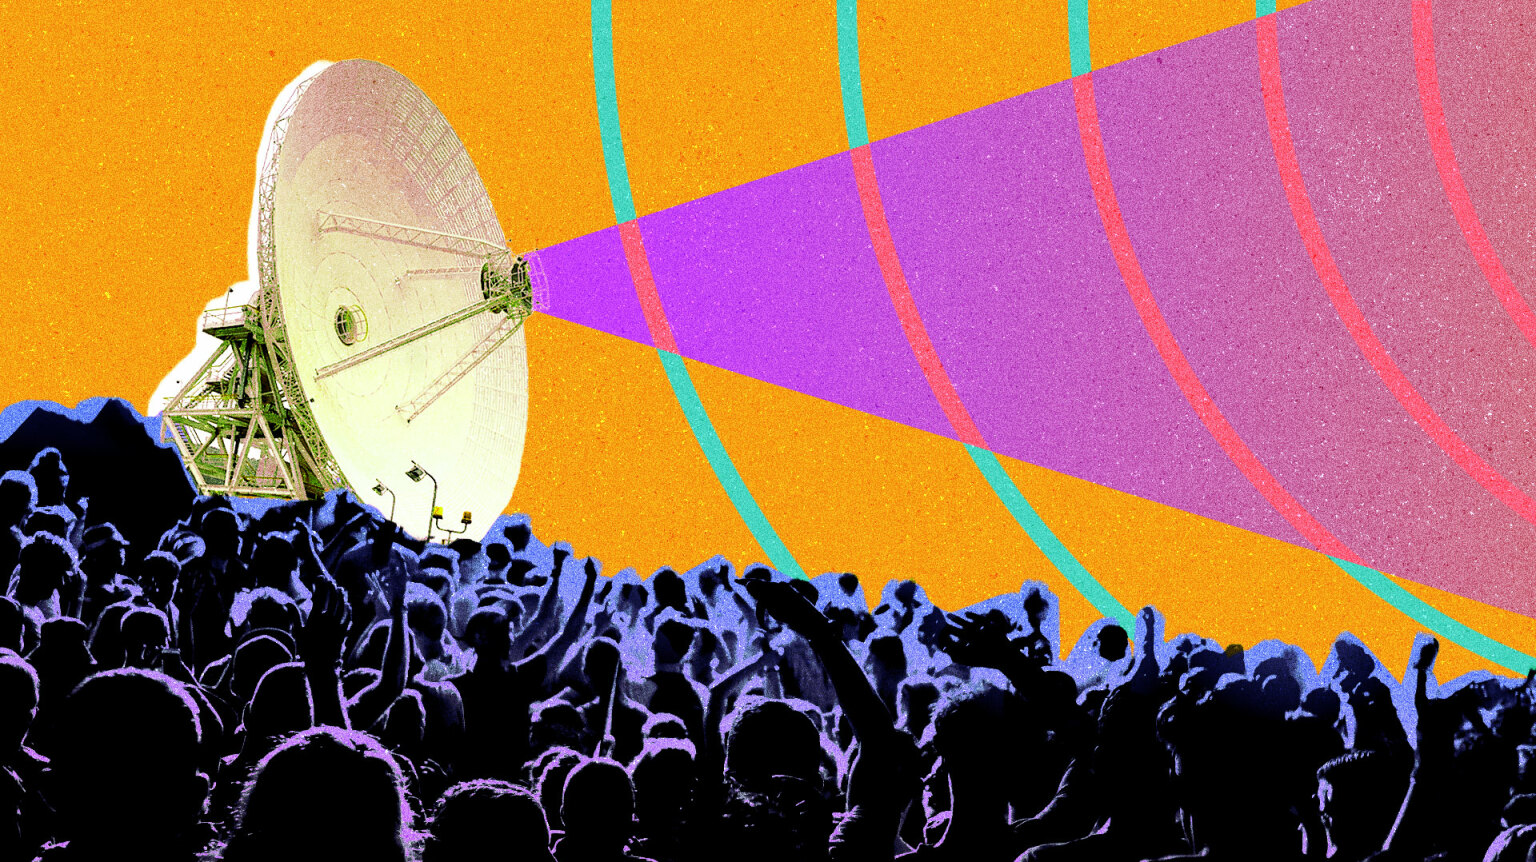 a large radio antenna with a crowd of people below